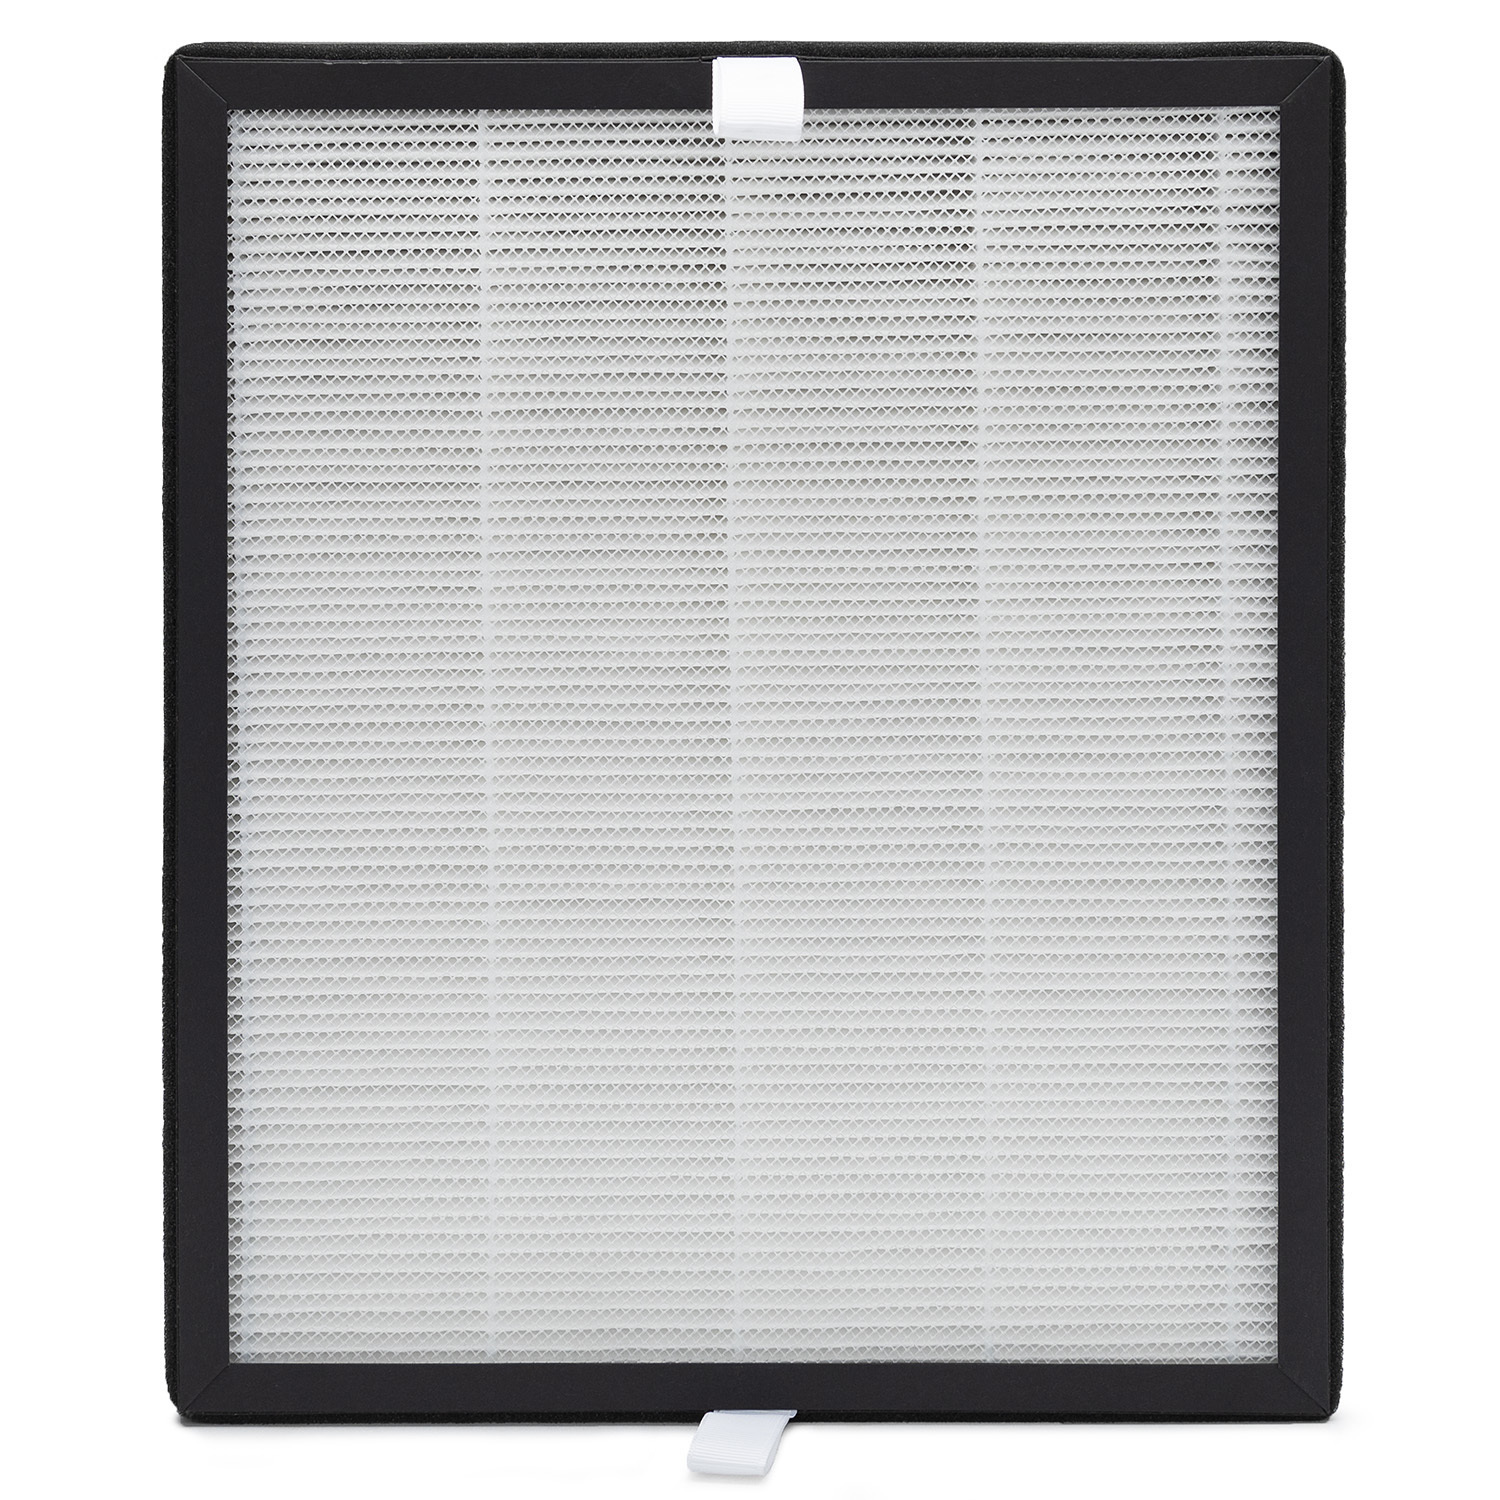 Lifestyle by Focus LS-AP200 HEPA Filter Replacement